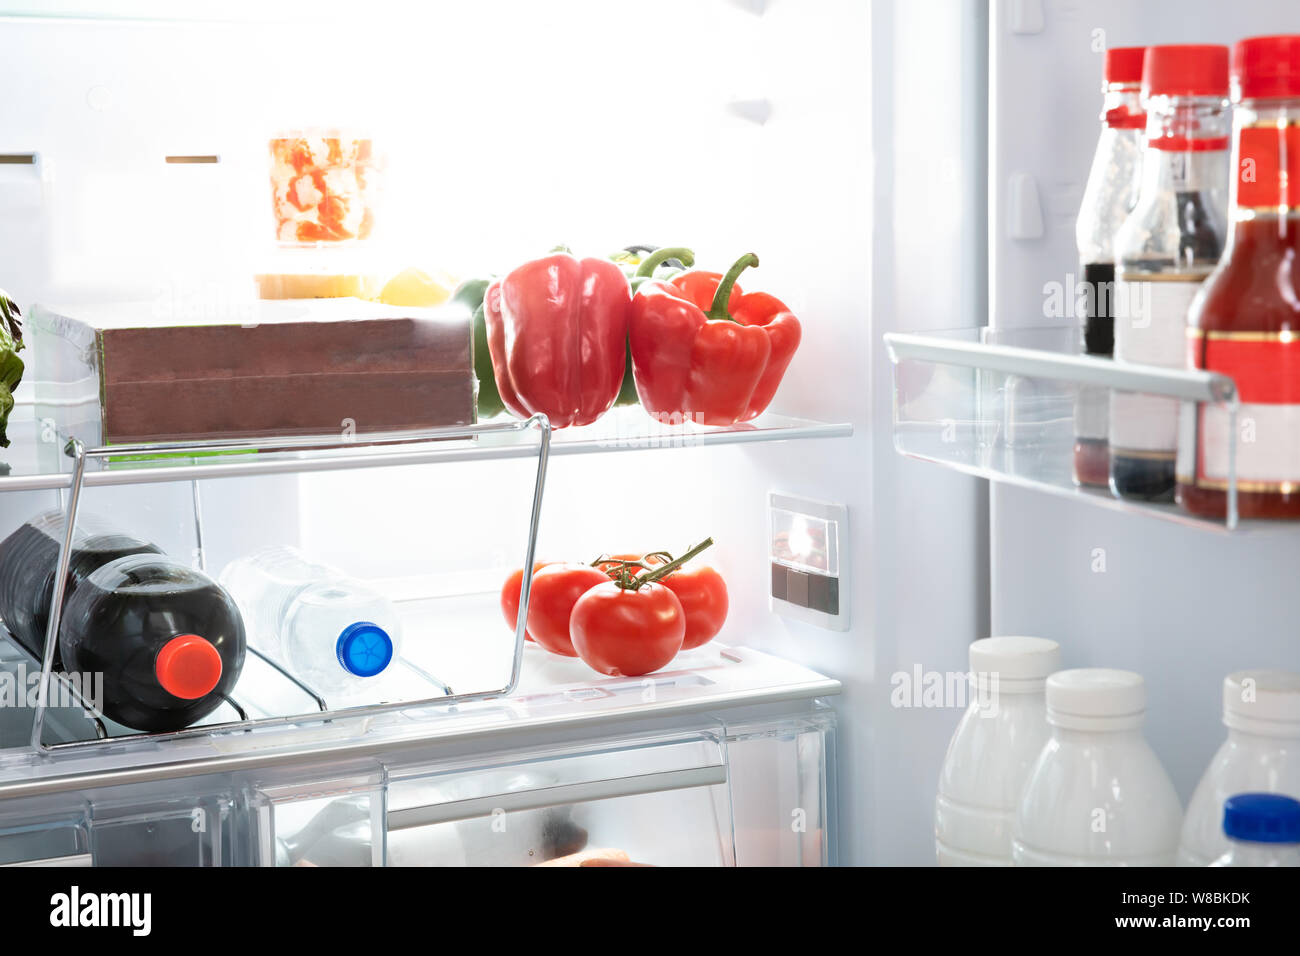 Photos Of An Open Refrigerator Full Of Healthy Foods Stock Photo